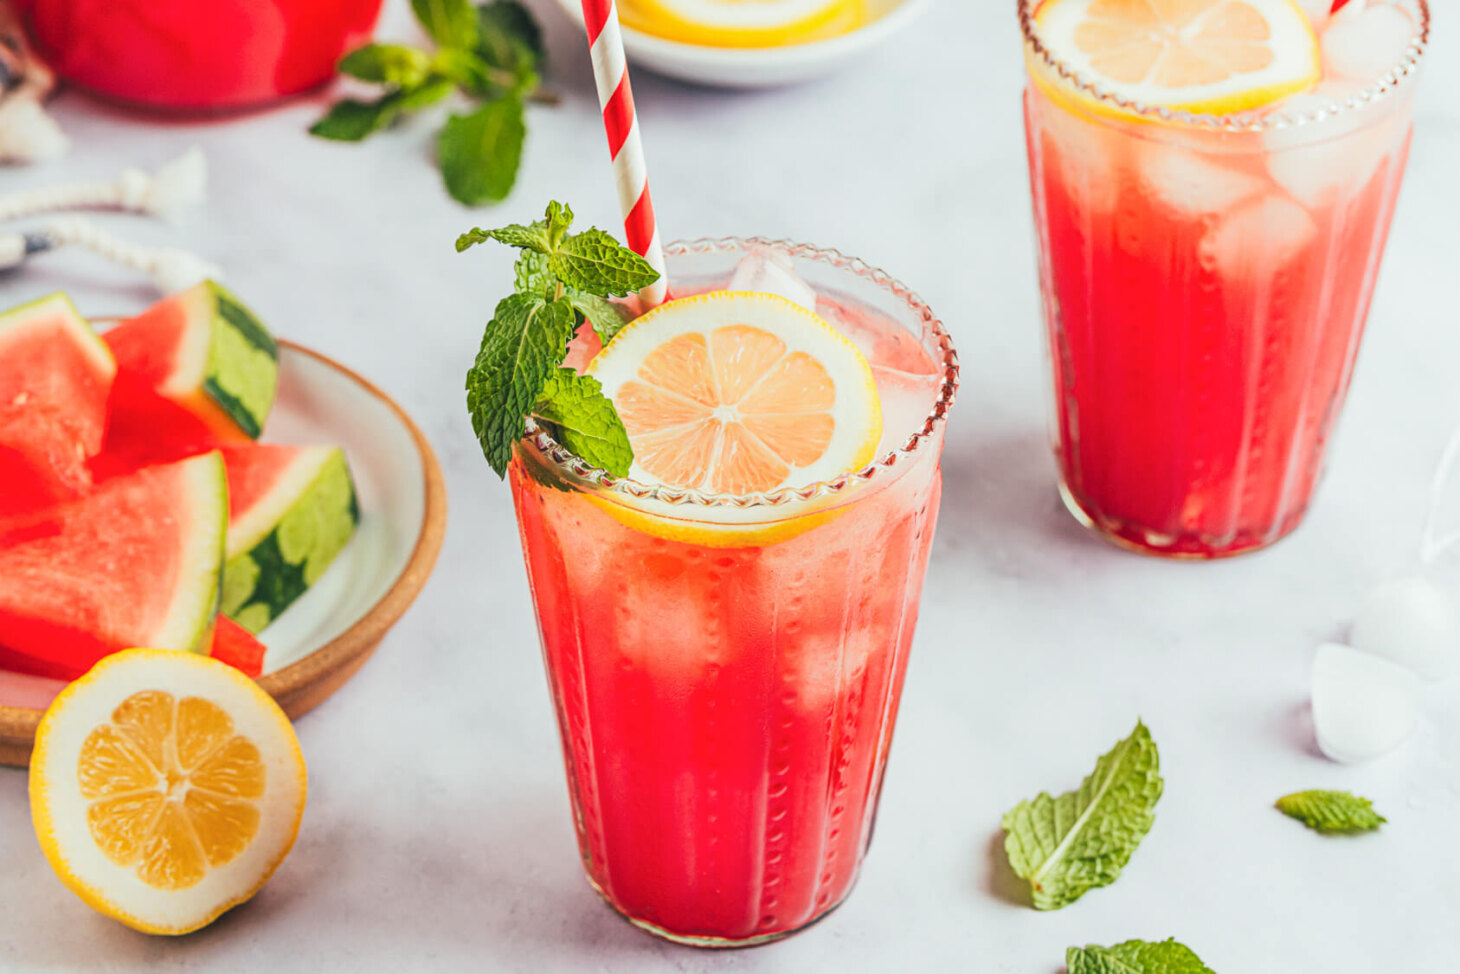 Two glasses of vibrant pink Watermelon Mint Lemonade garnished with fresh mint and lemon slices beside a plate of sliced watermelon.